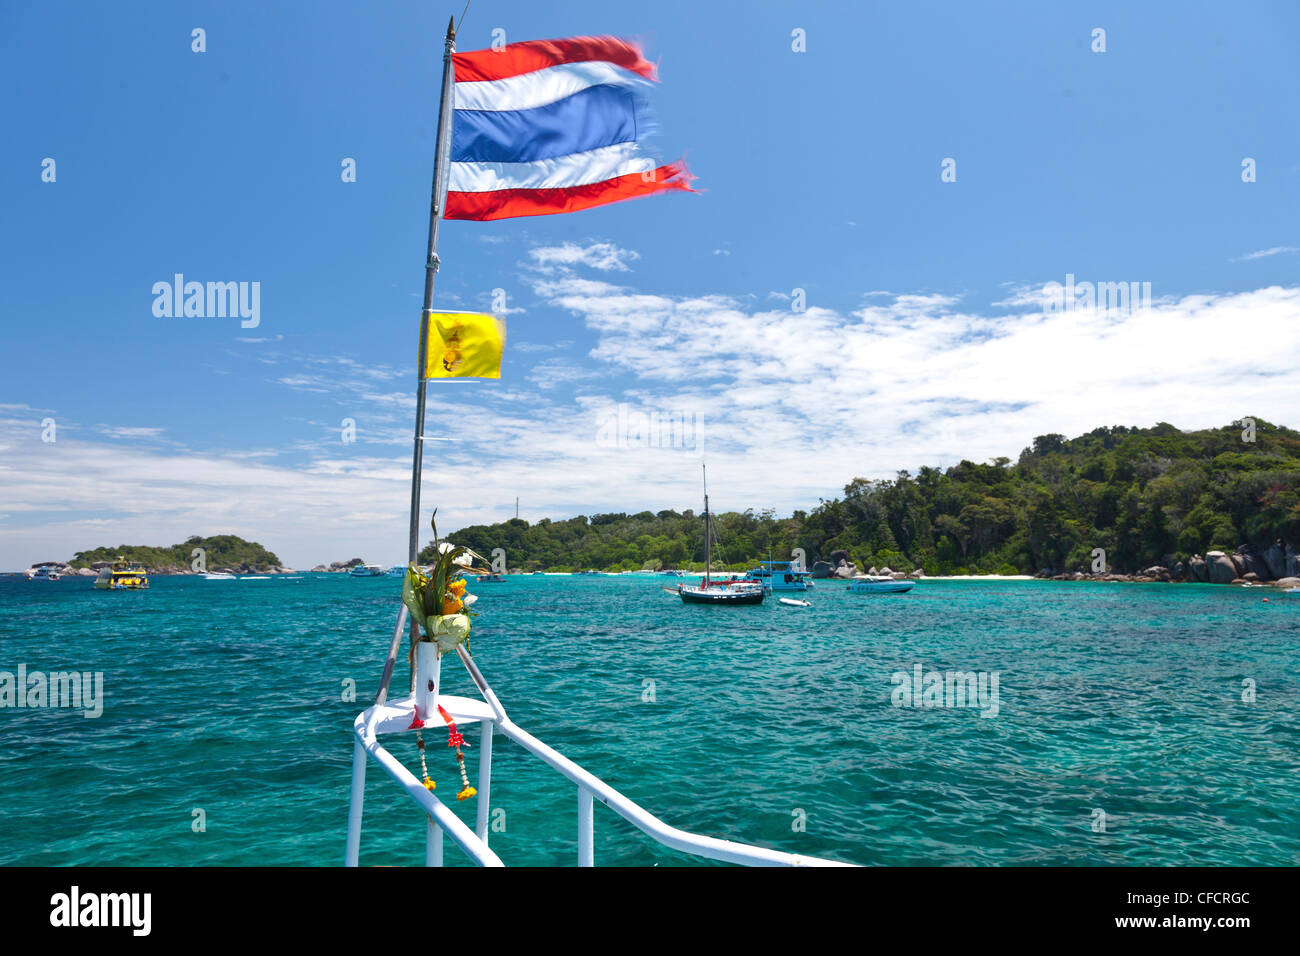 Thai flag in the wind and boats in a bay, Similan Islands, Andaman Sea, Indian Ocean, Khao Lak, Thailand, Asia Stock Photo